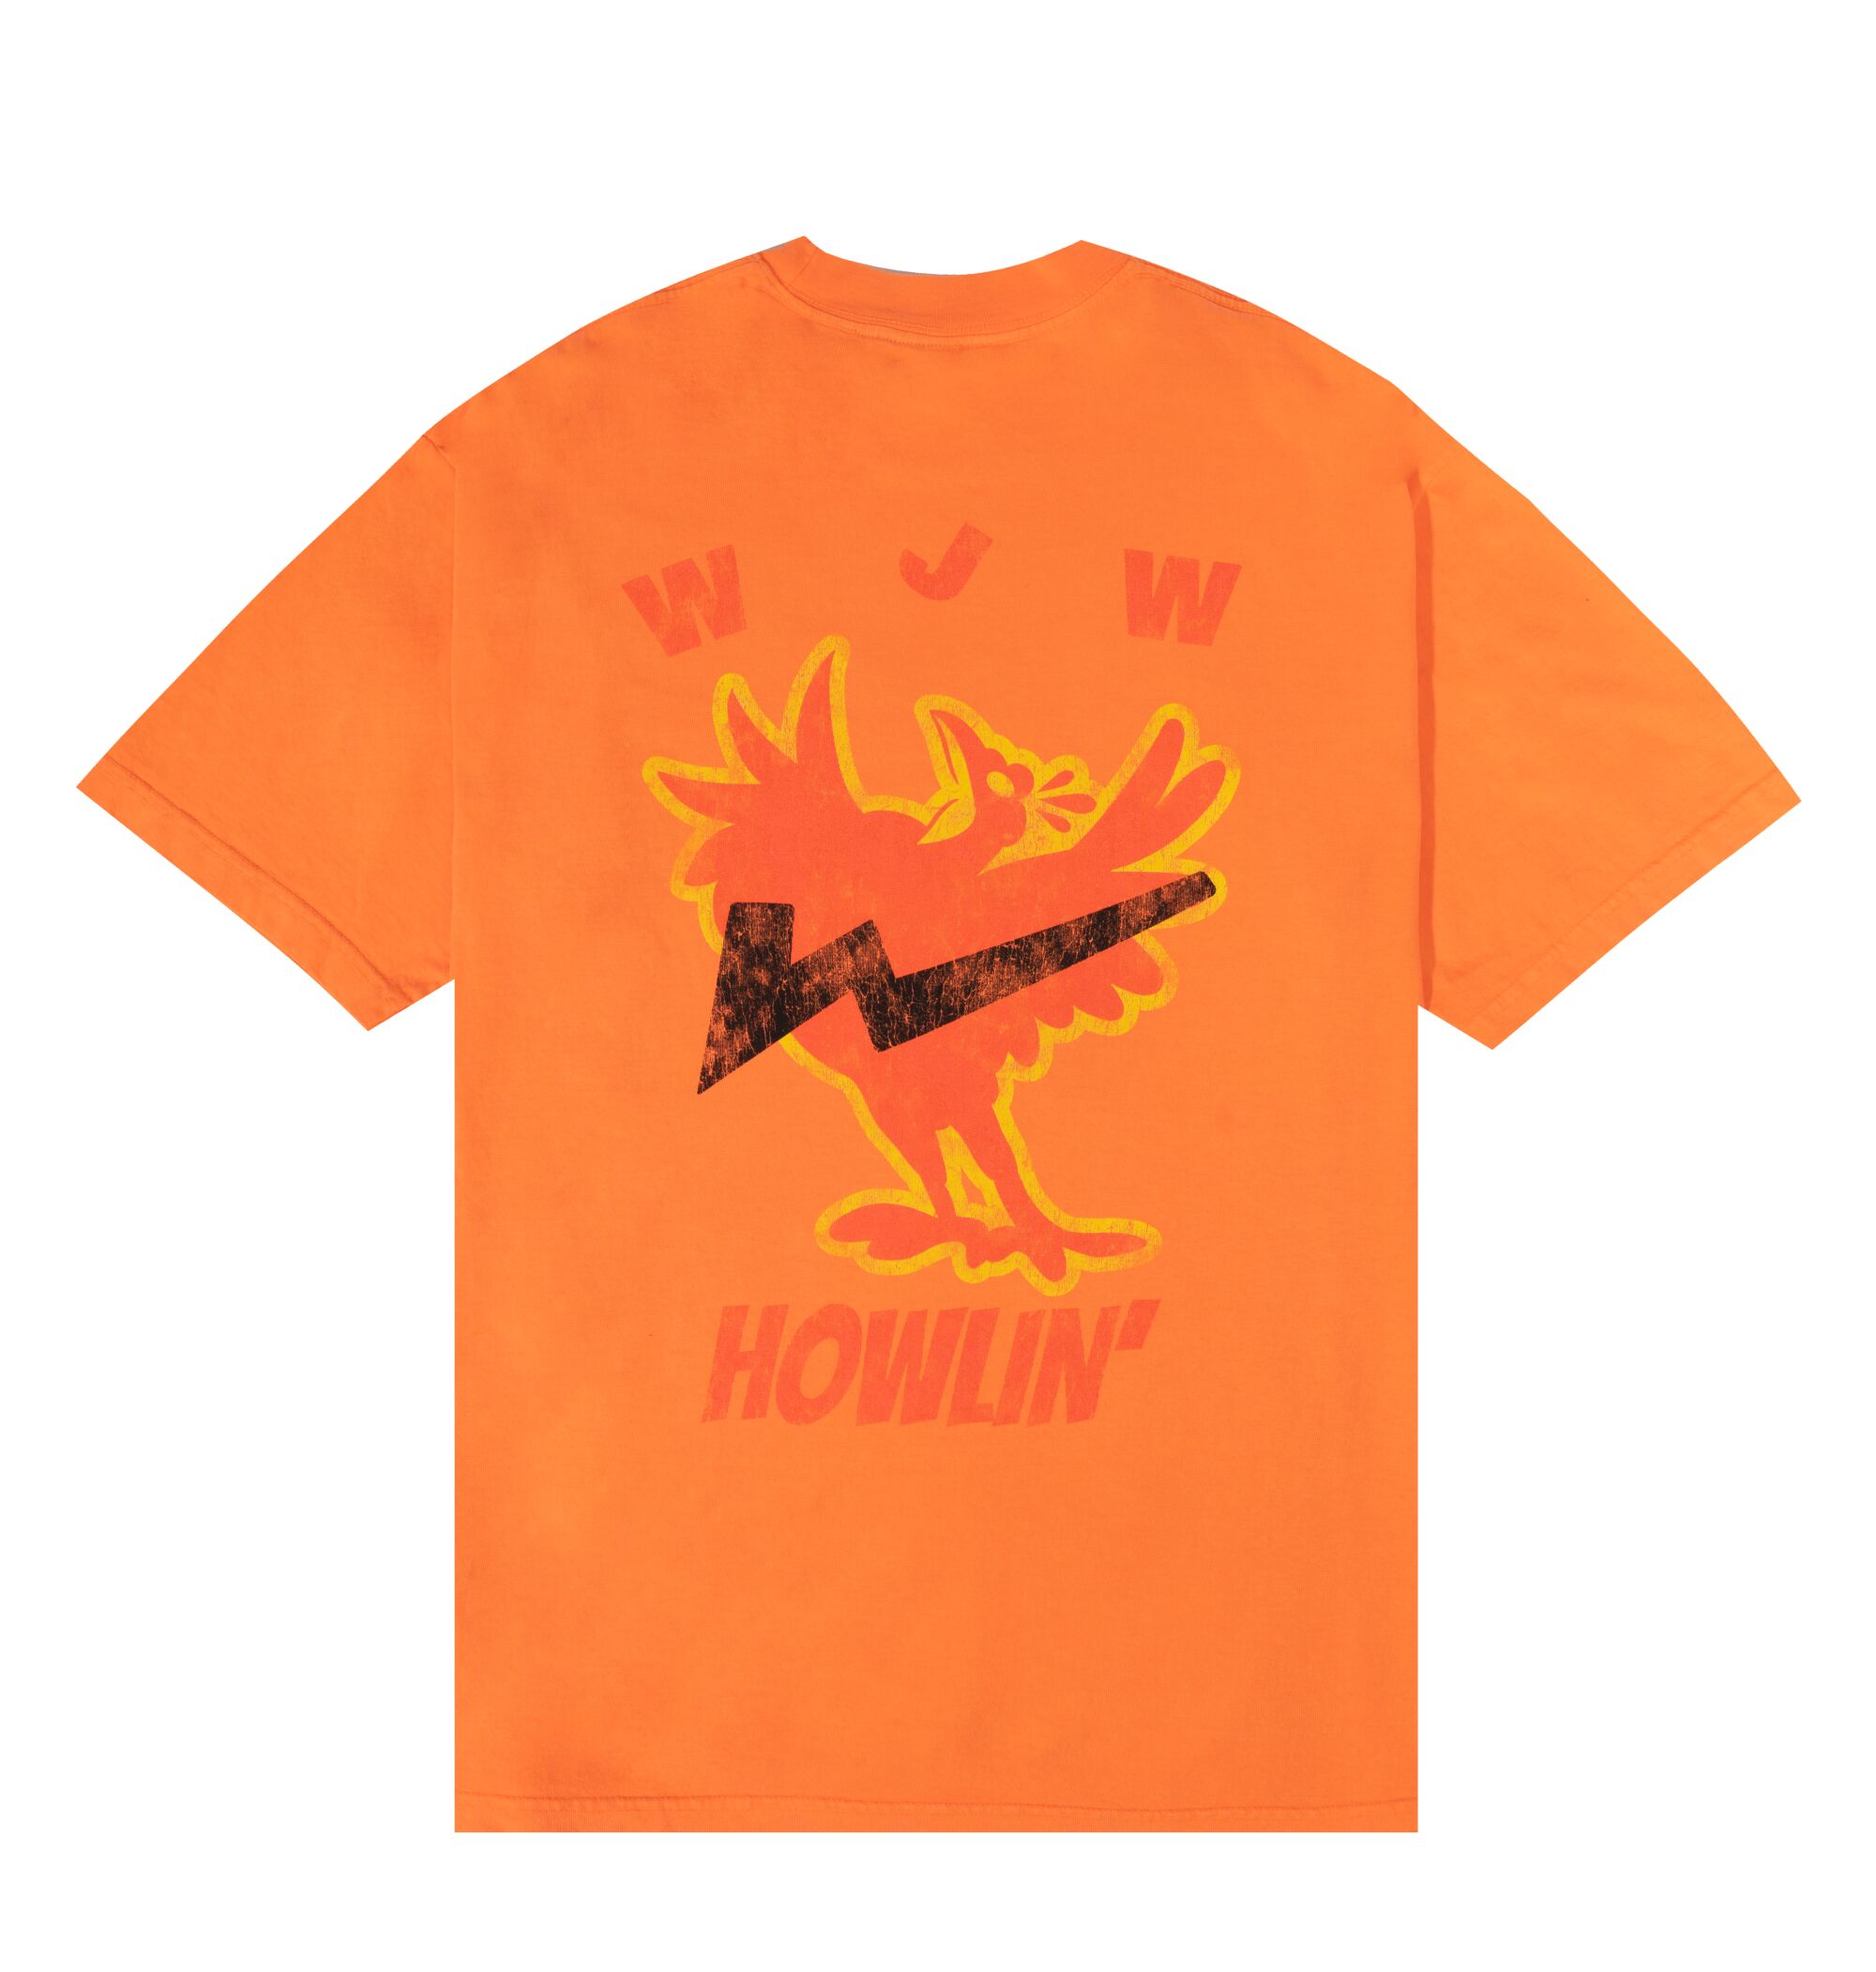 Iconic chicken logo appears on an orange T-shirt